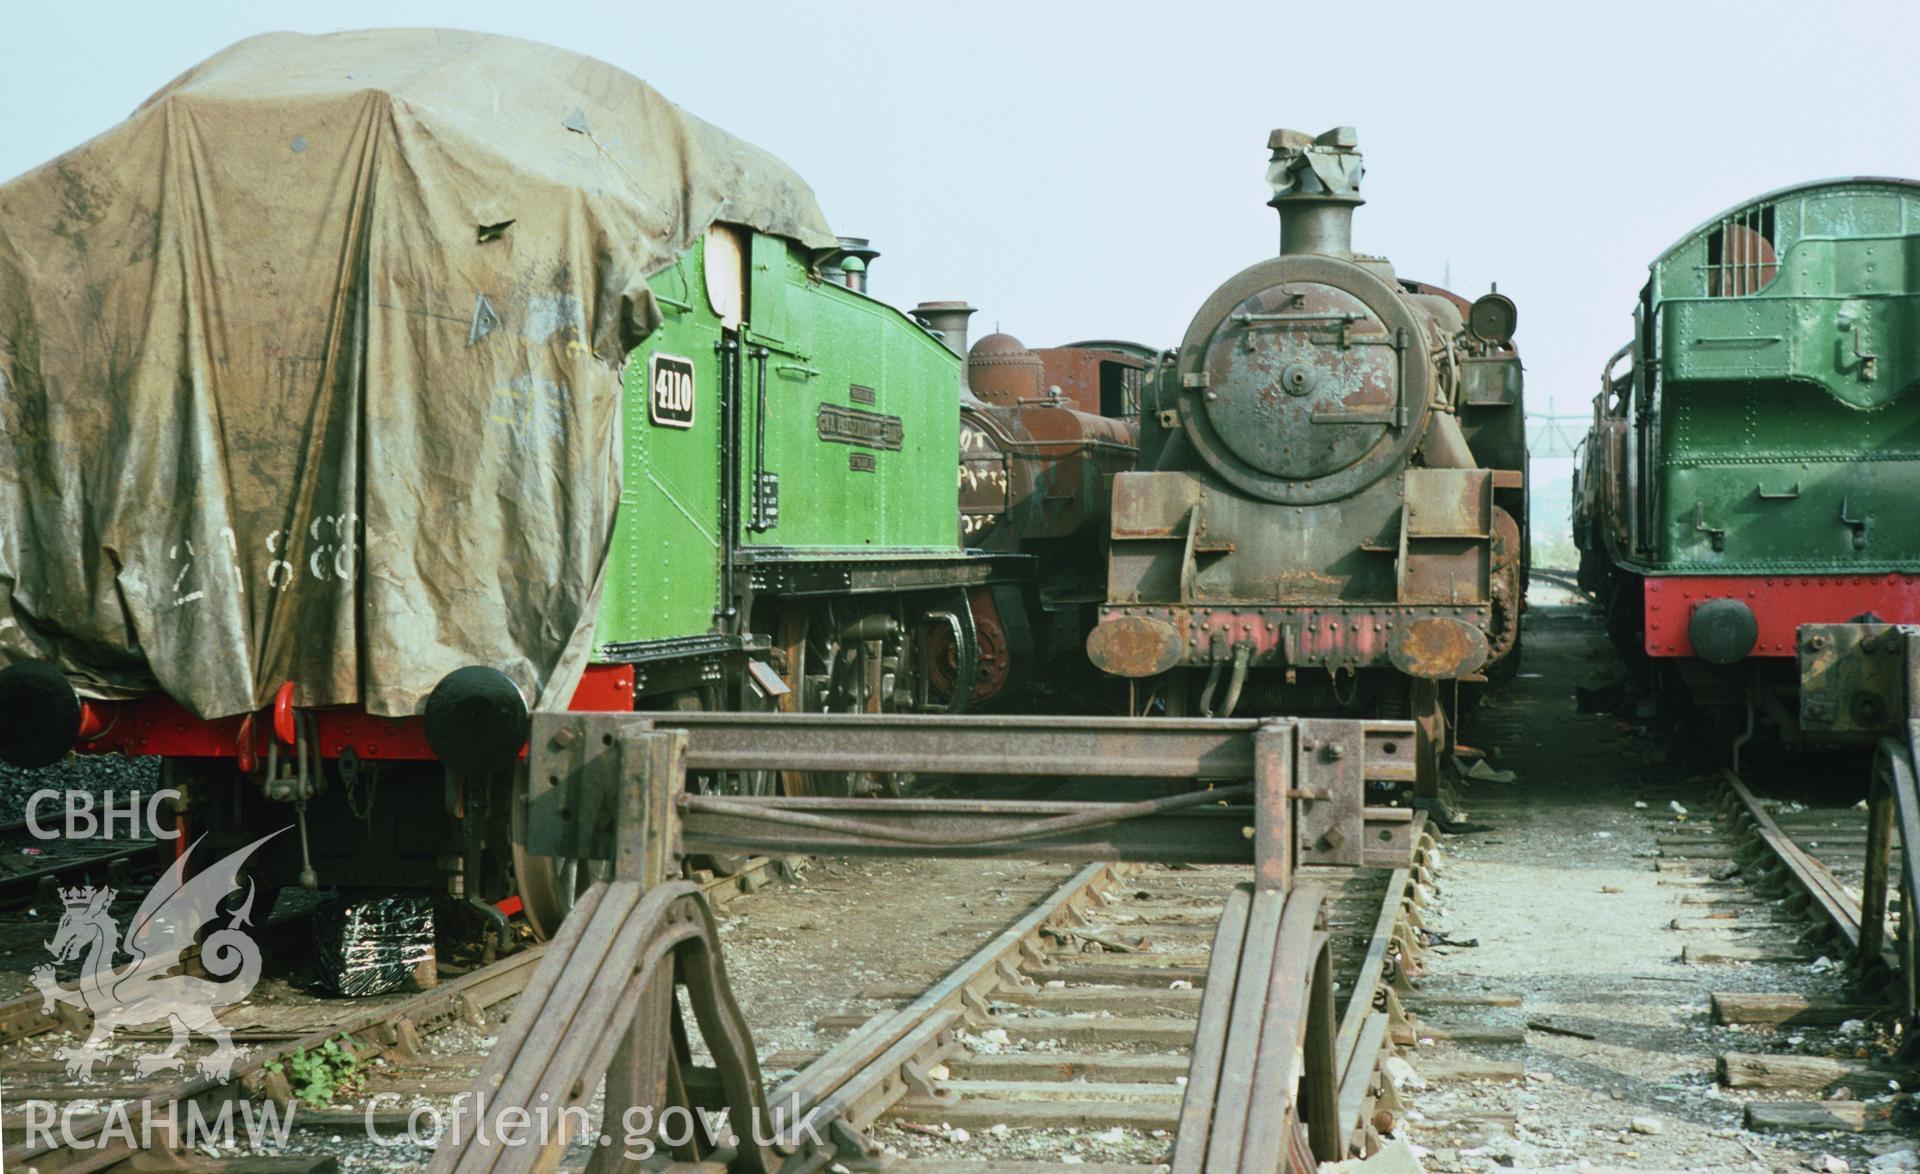 35mm colour slide showing steam locomotives in the sidings at Barry Town Station, Glamorgan, by Dylan Roberts.